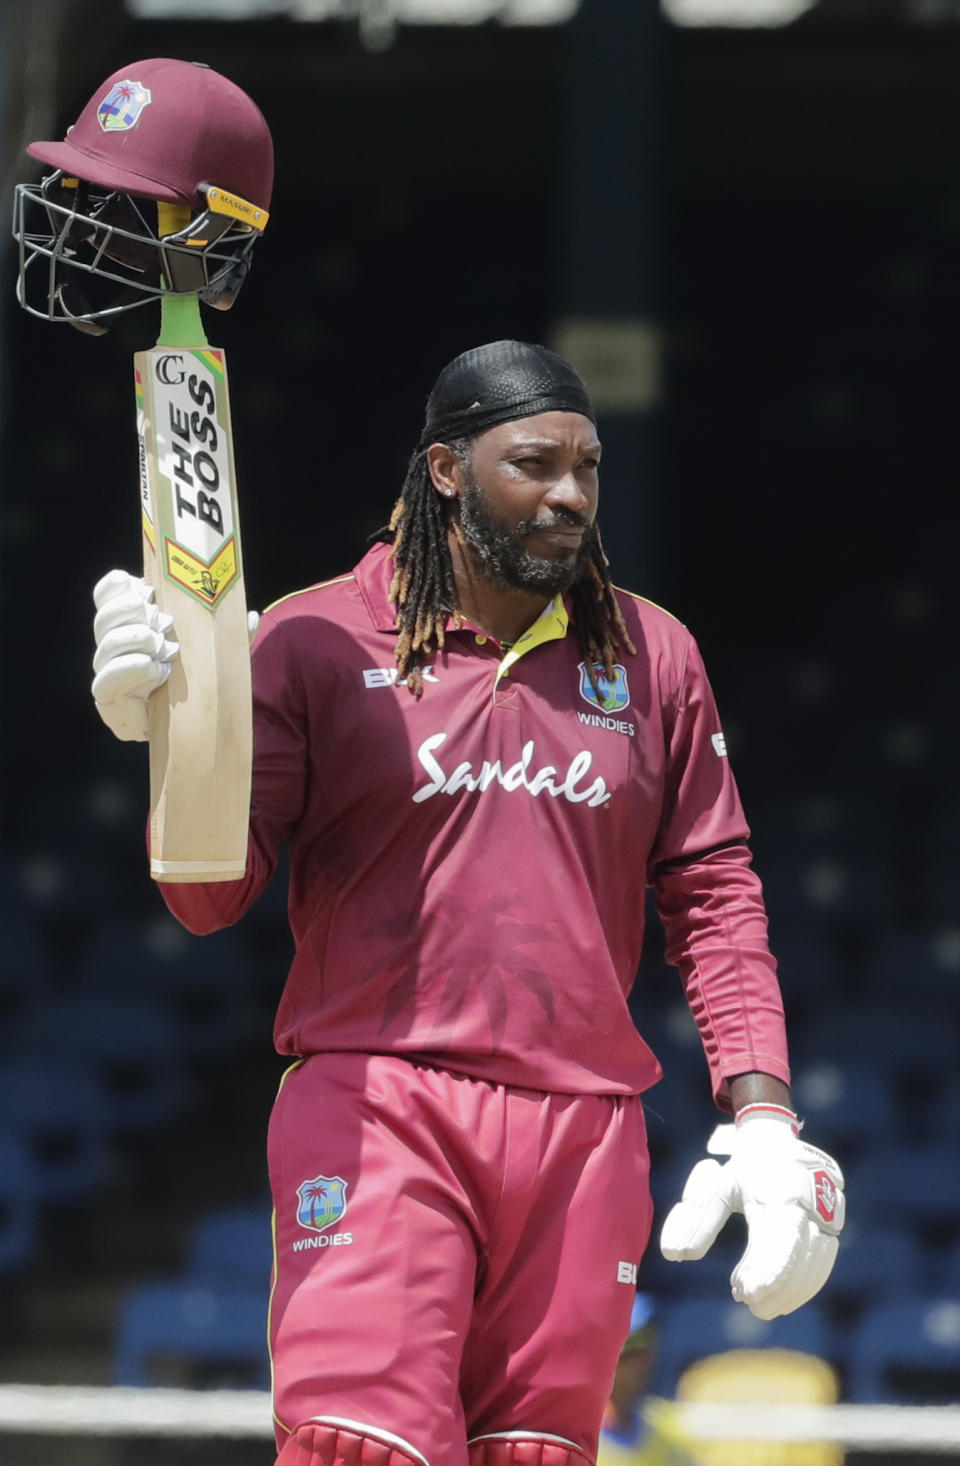 West Indies opener Chris Gayle raises his bat to the crowd after reaching a half century on the third One-Day International cricket match India in Port of Spain, Trinidad, Wednesday, Aug. 14, 2019. (AP Photo/Arnulfo Franco)